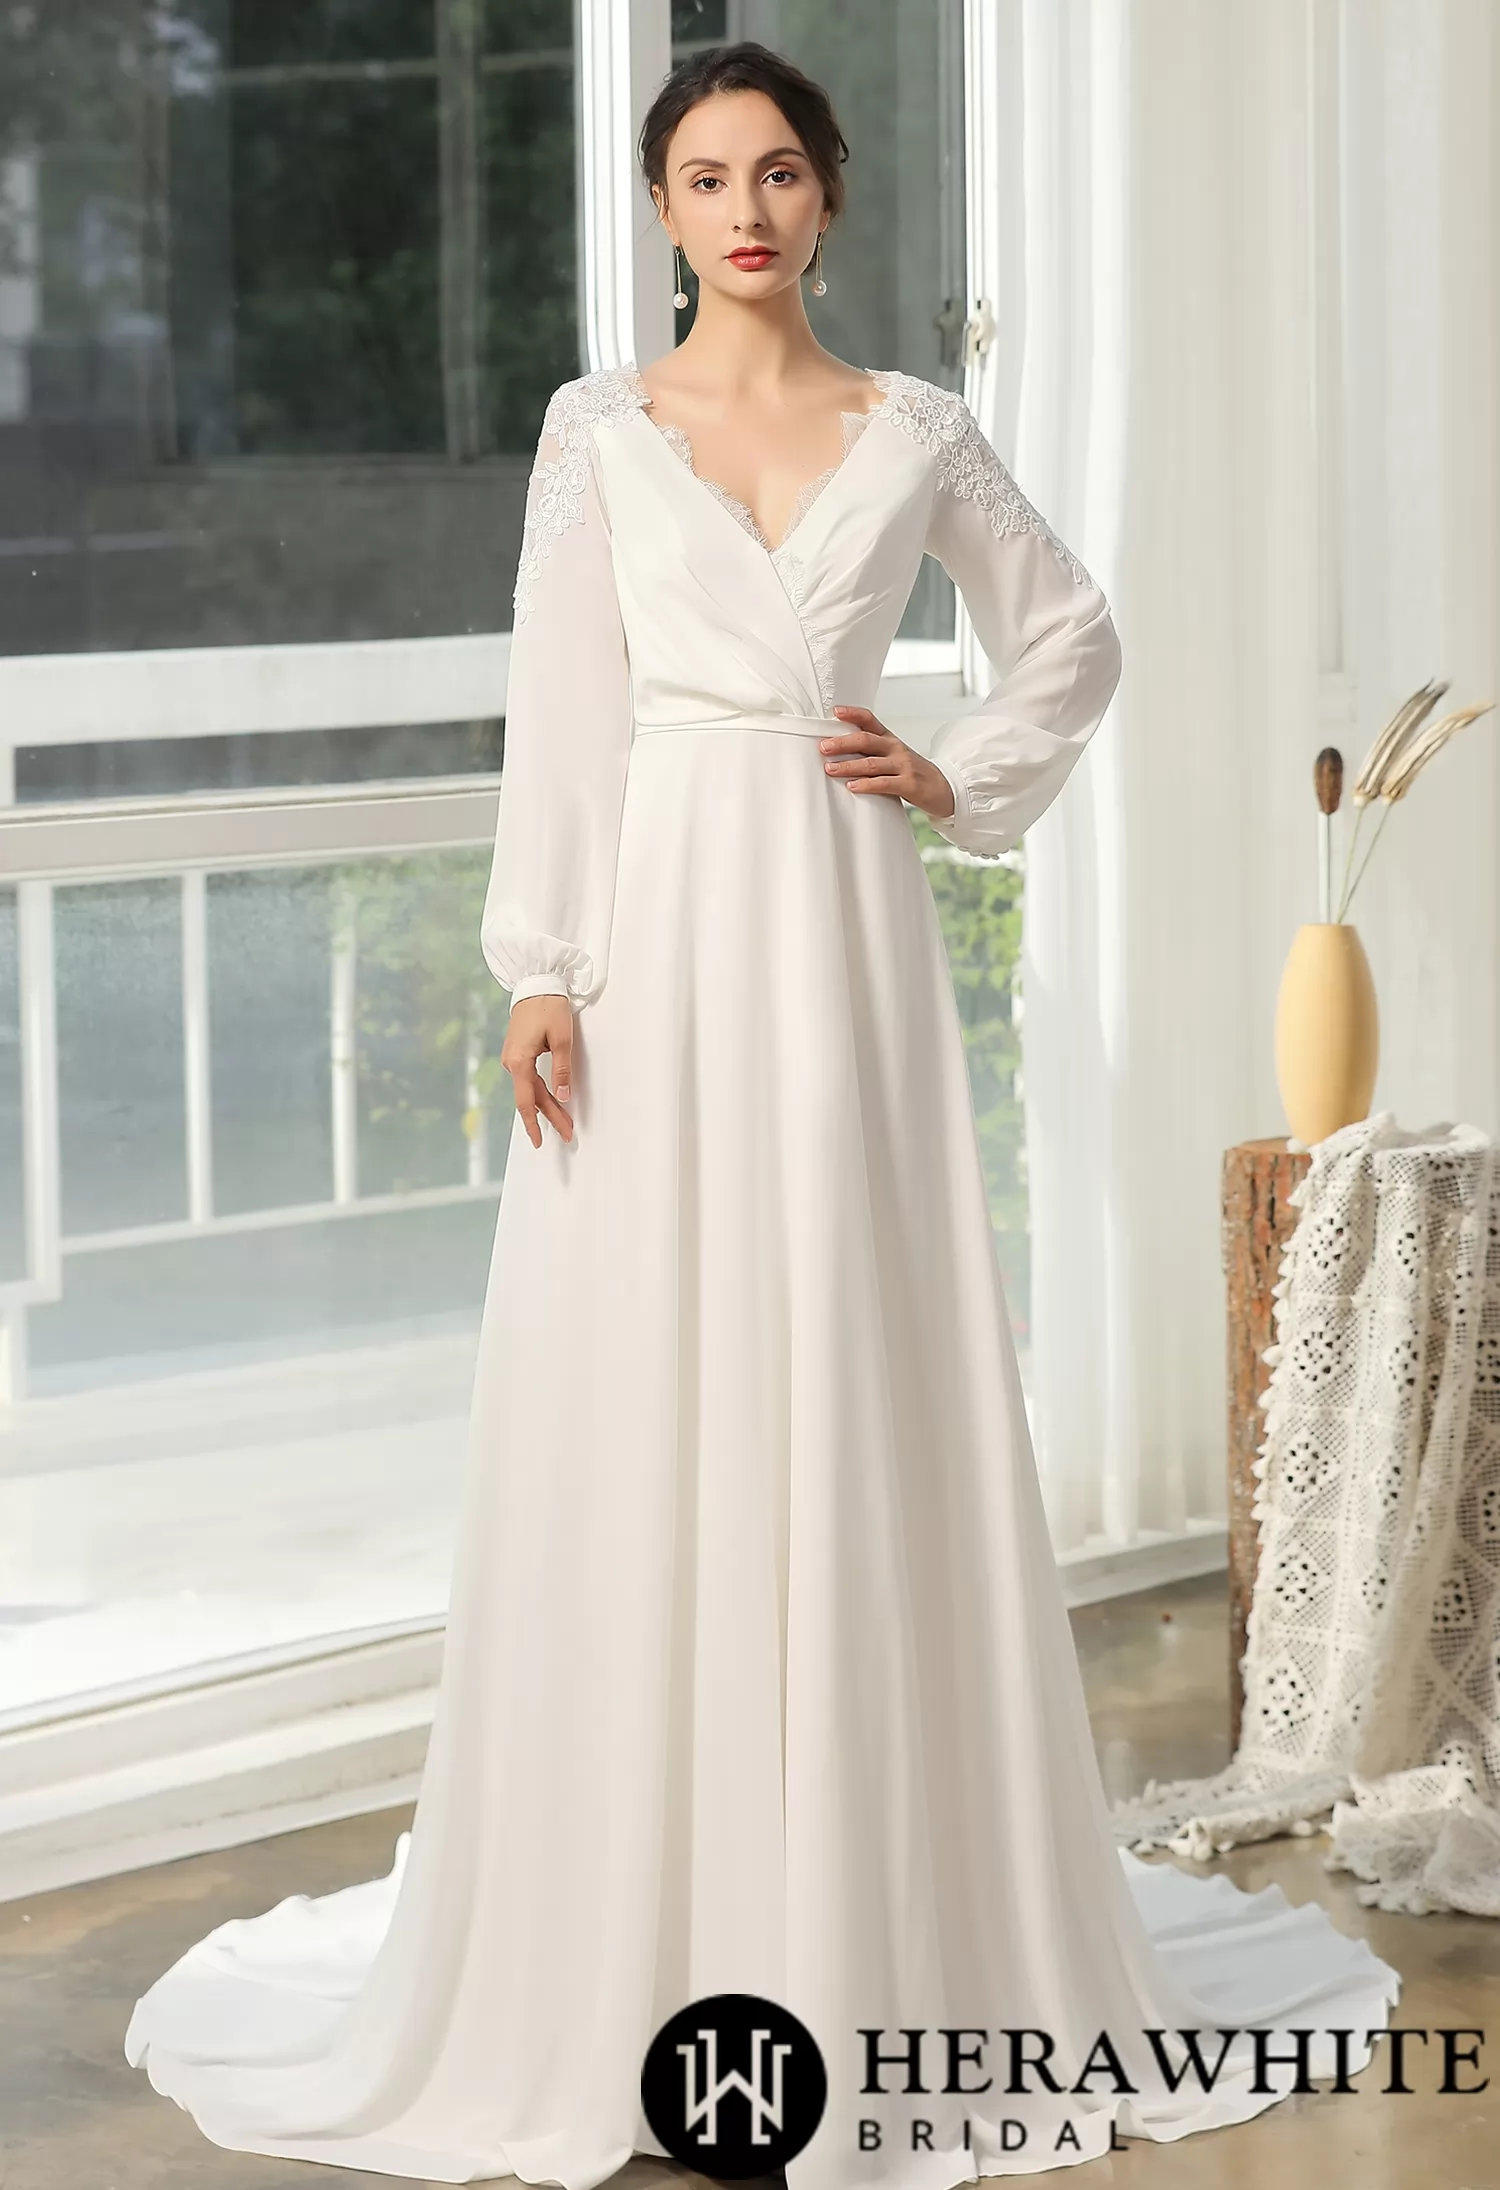 Simply Crossed Neckline And Lace Back Wedding Dress